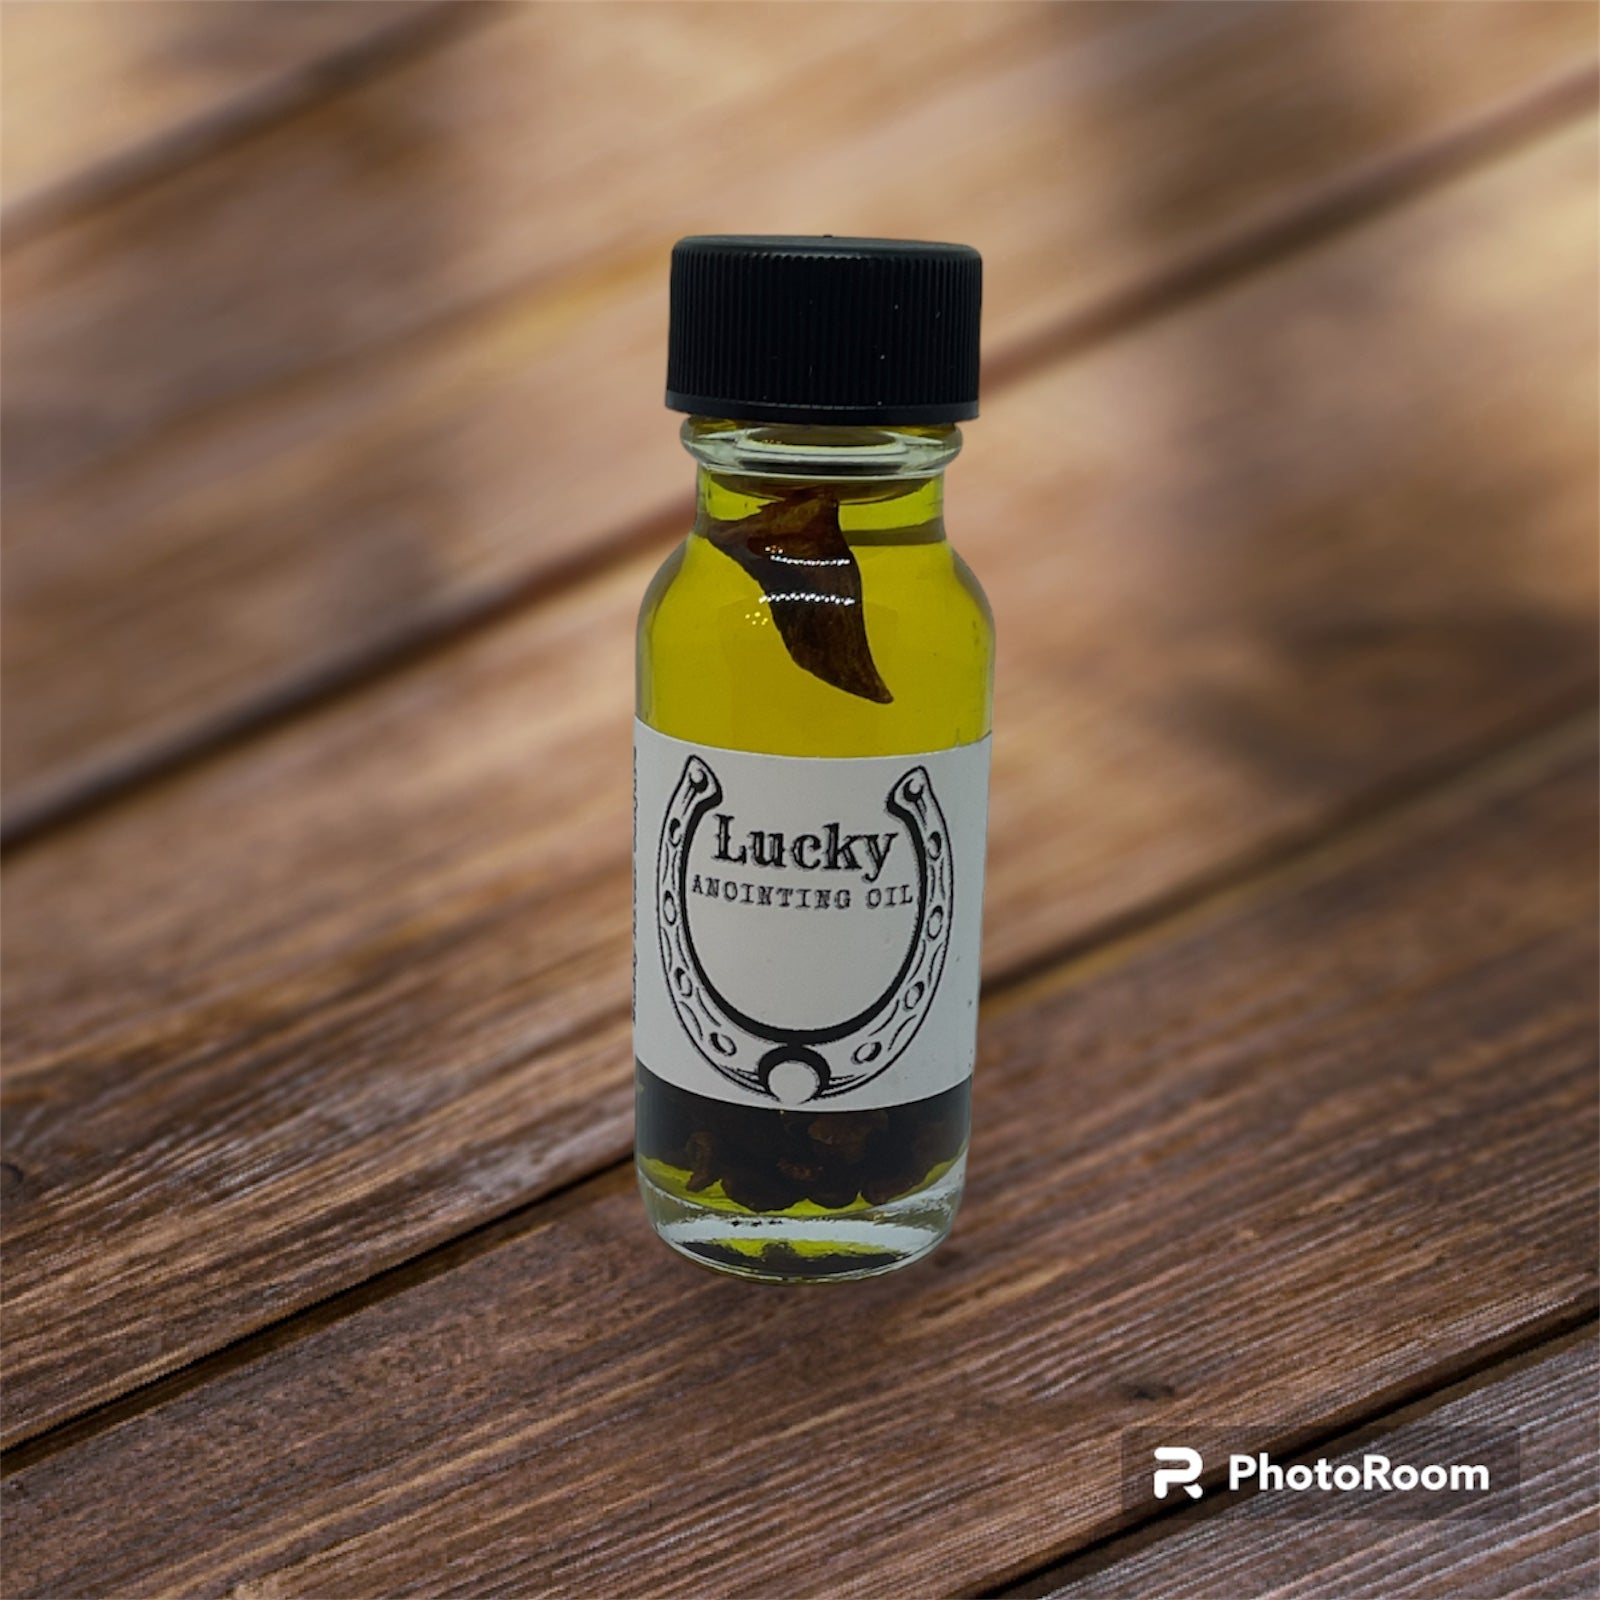 Intentioned Based Good Luck Anointing Oil